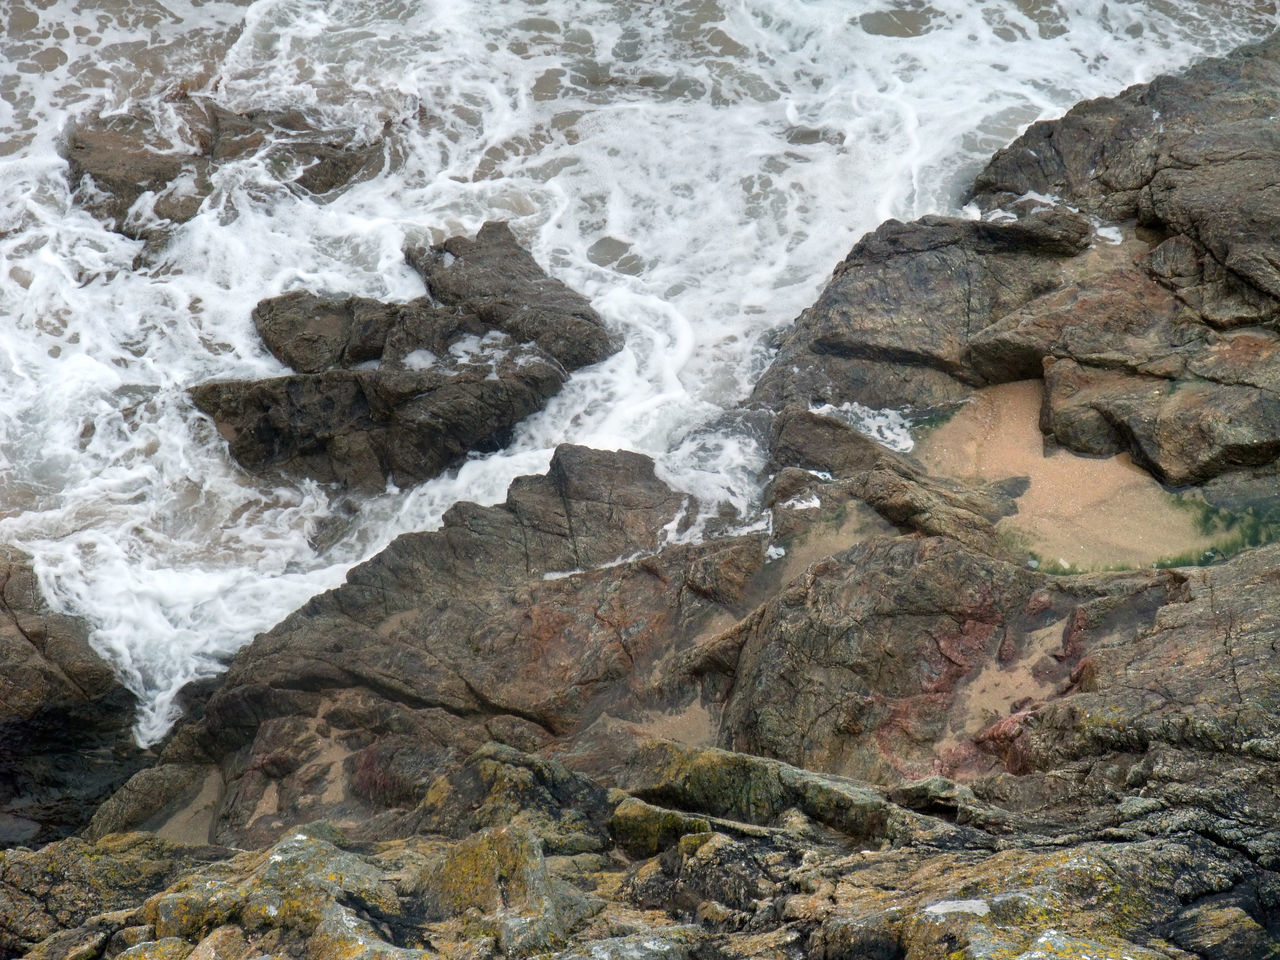 HIGH ANGLE VIEW OF STREAM FLOWING THROUGH ROCKS